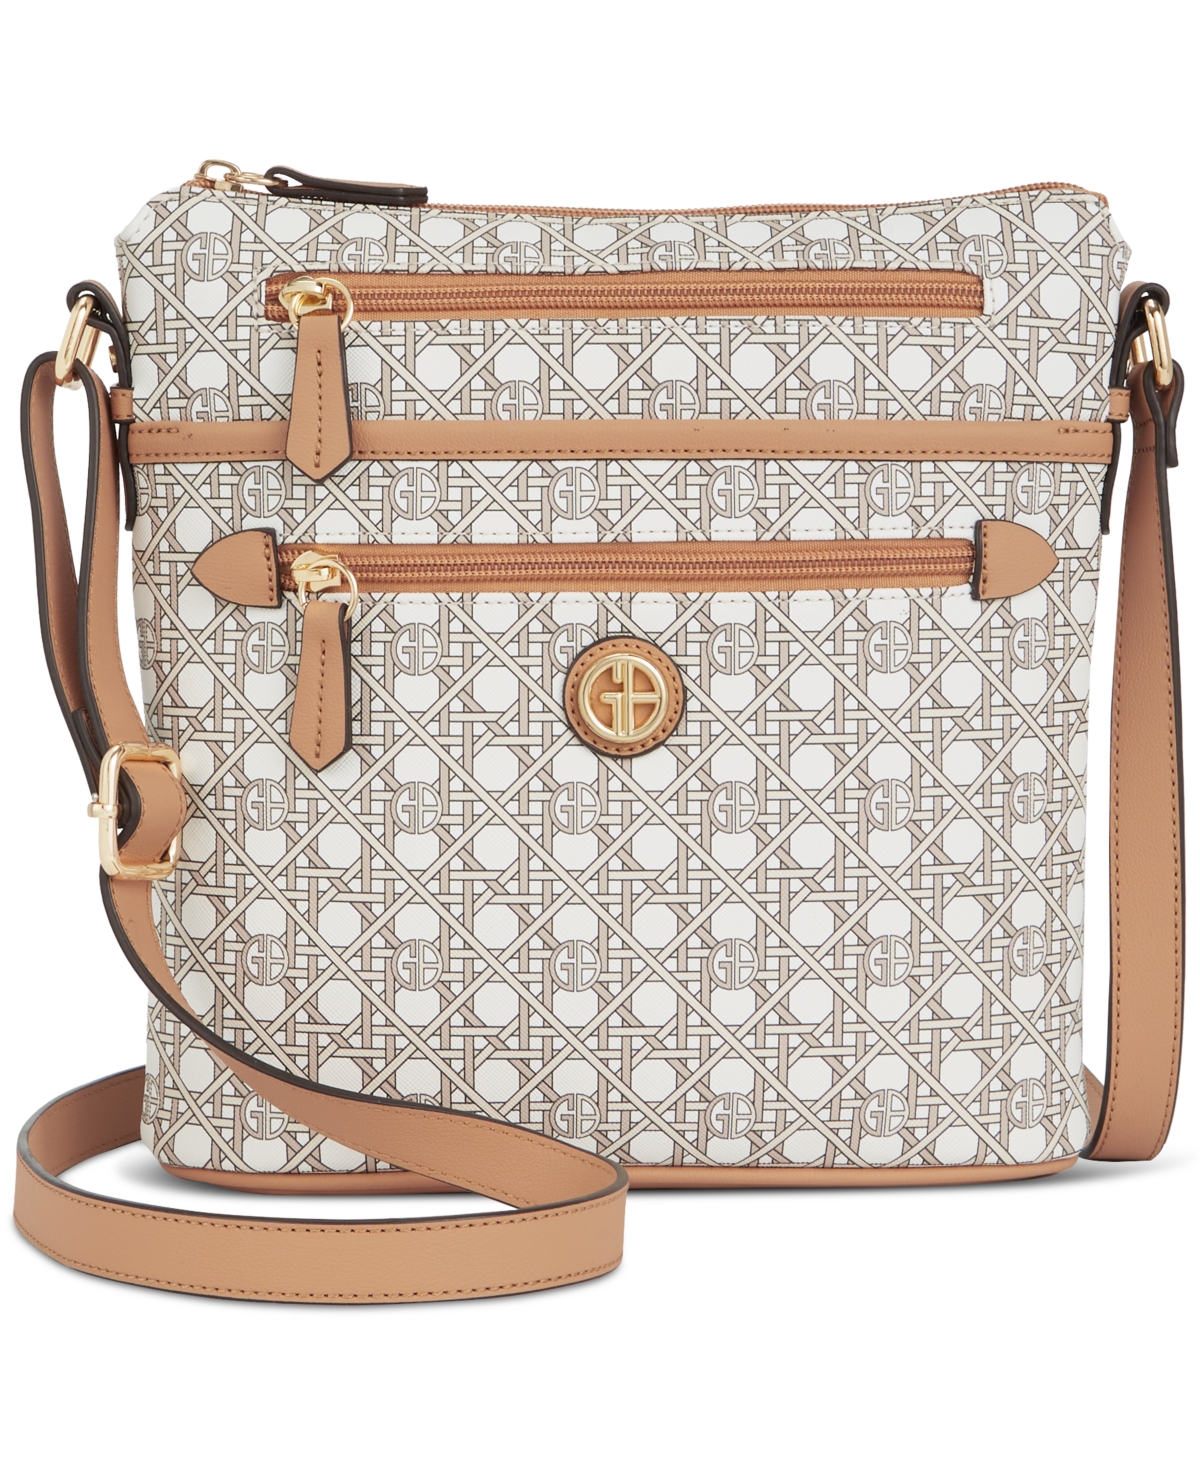 Caning North South Crossbody, Created for Macy's - White/humus